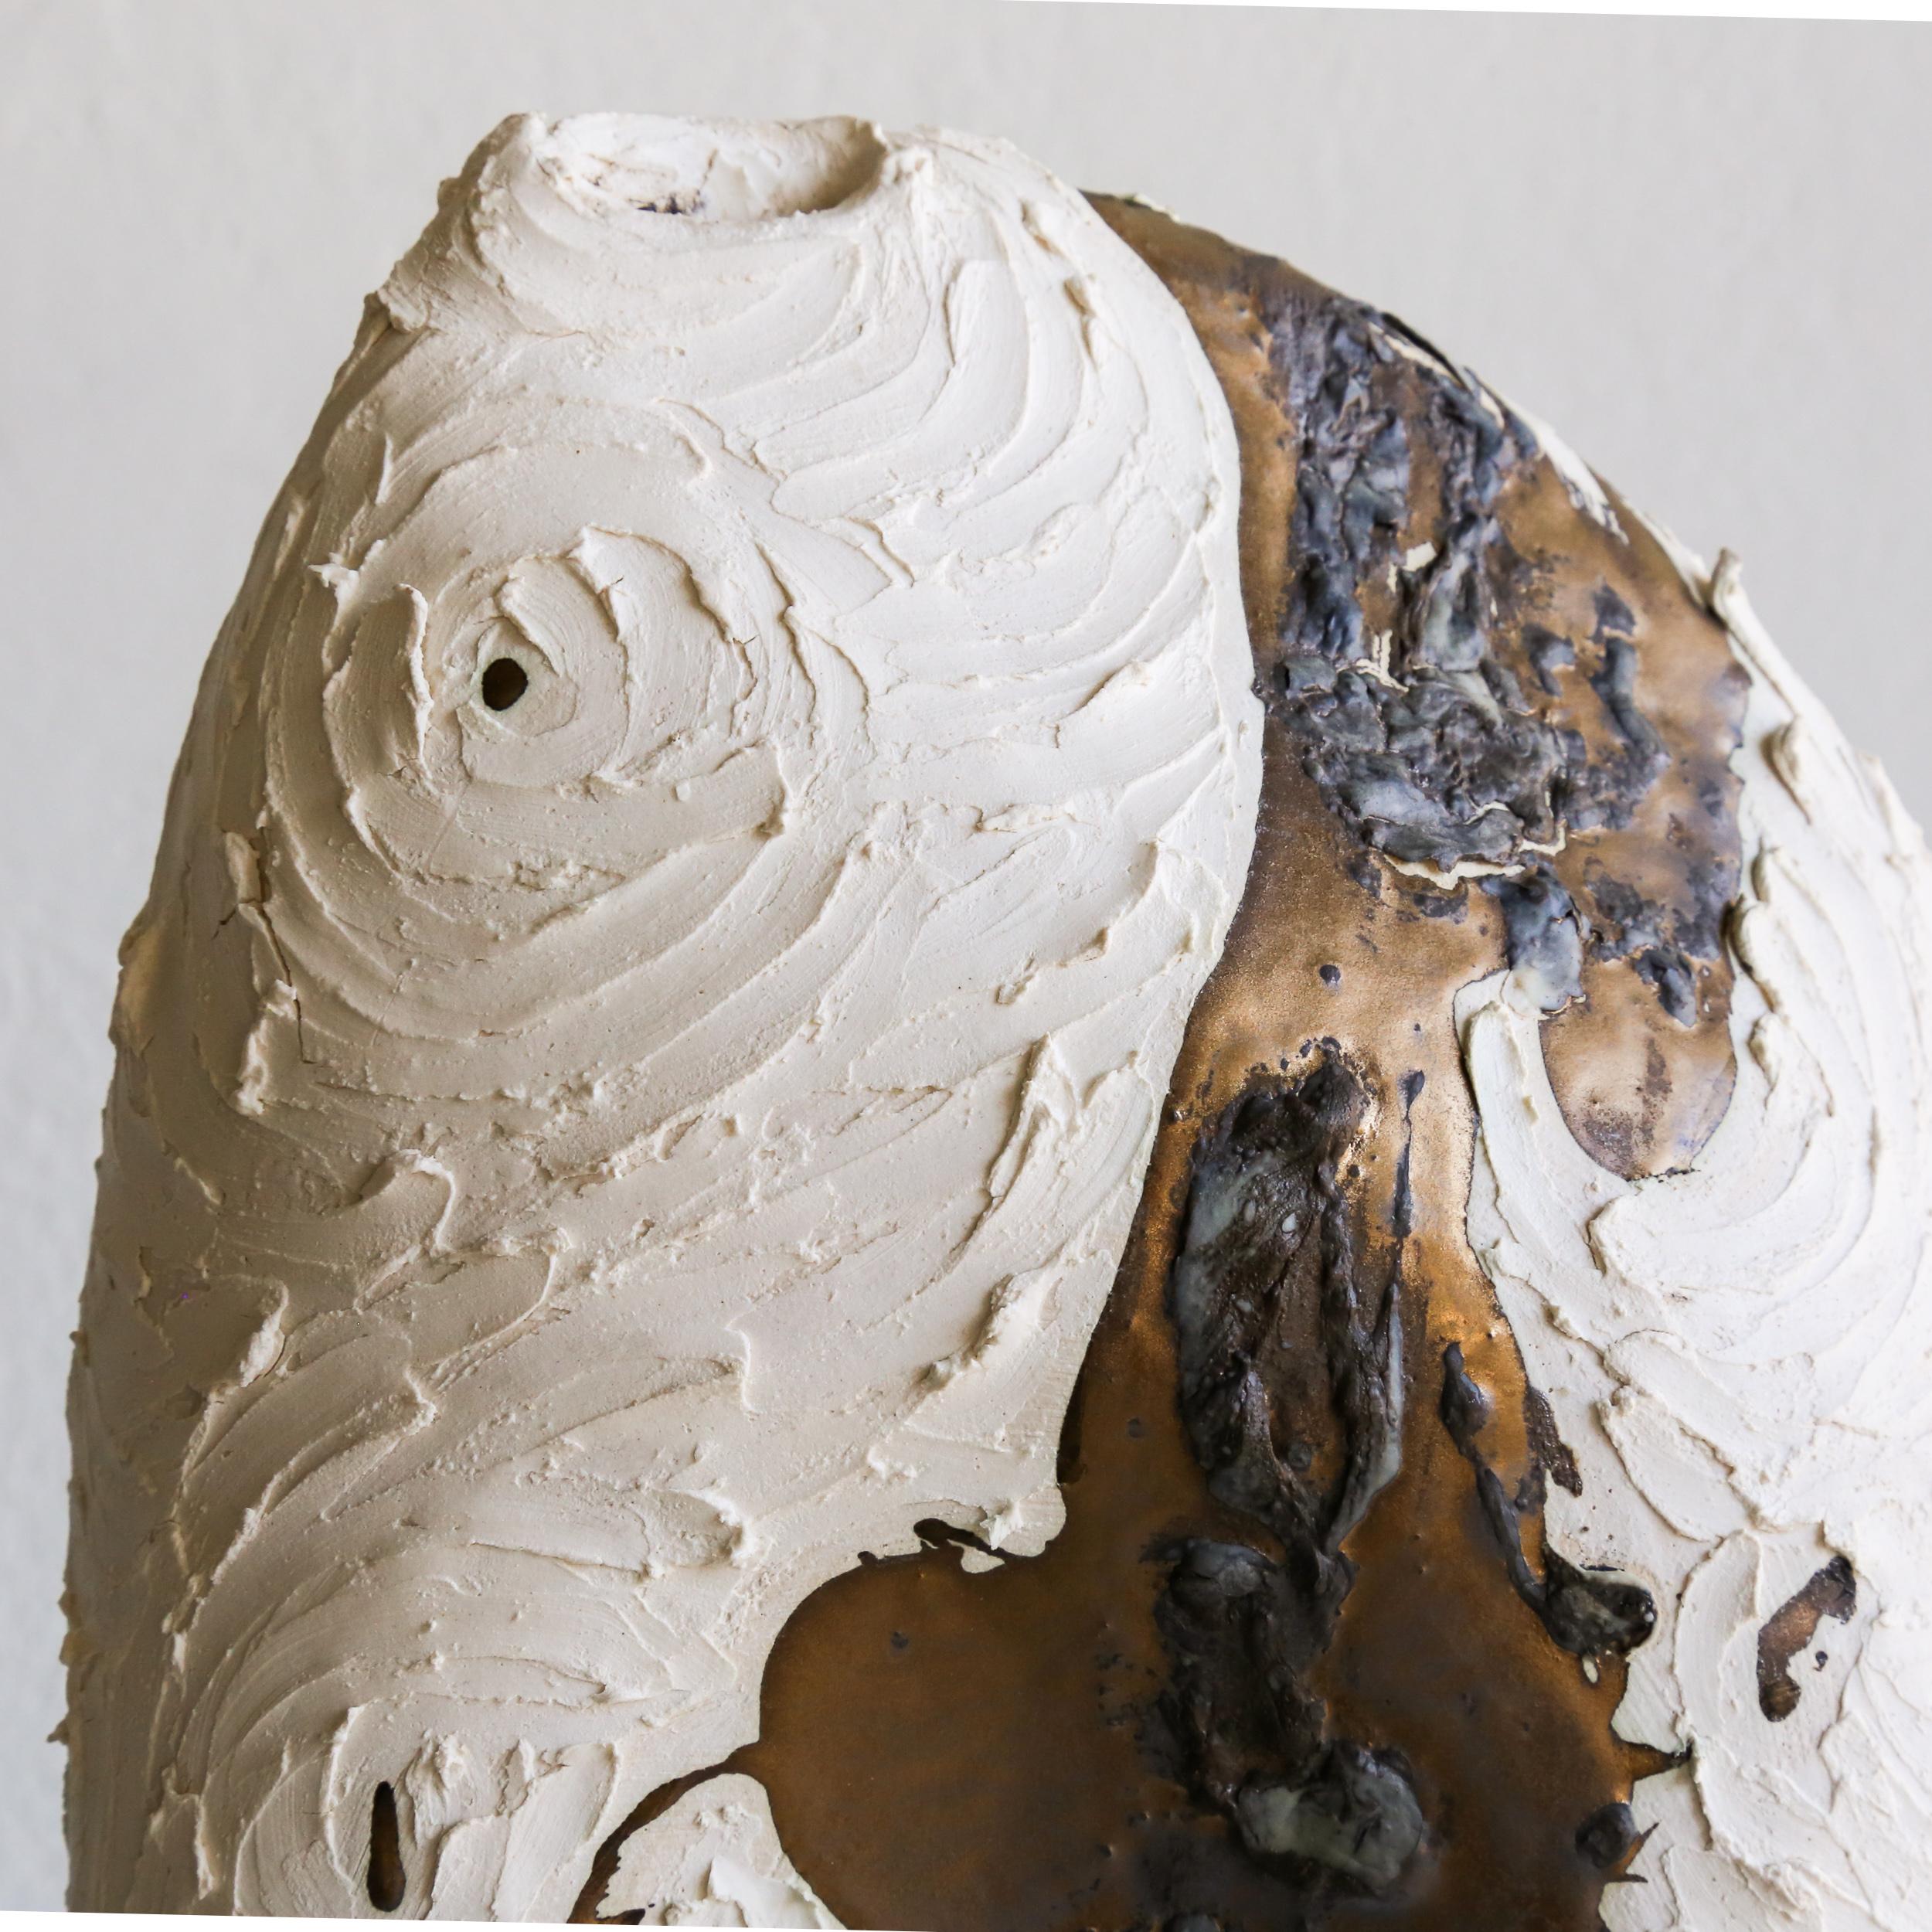 Original Hand-built sculptural ceramics to enrich the mind and feed the soul.

White And Gold Vessel No 124
• Stoneware/Porcelain, Metallic Gold Glaze

Artist Statement:
As a sculptor, I use clay to bring to life the complex and ephemeral emotions